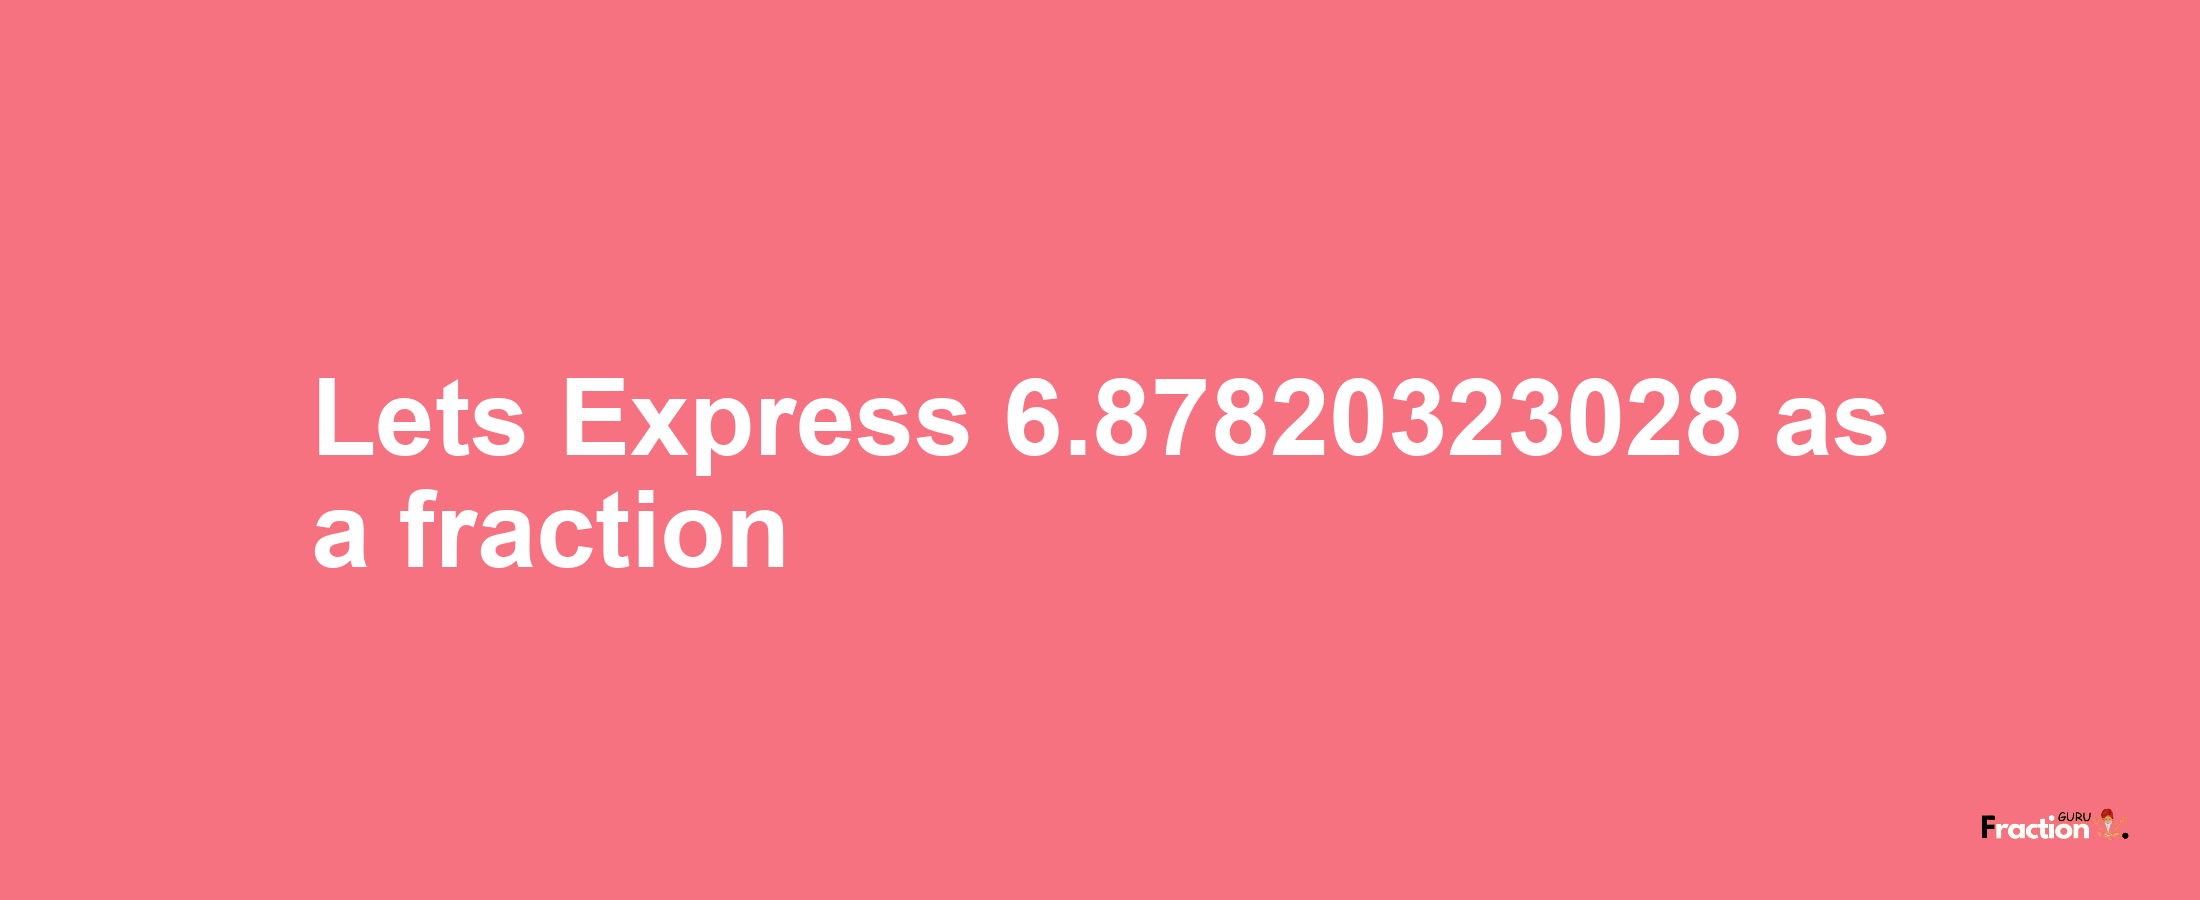 Lets Express 6.87820323028 as afraction